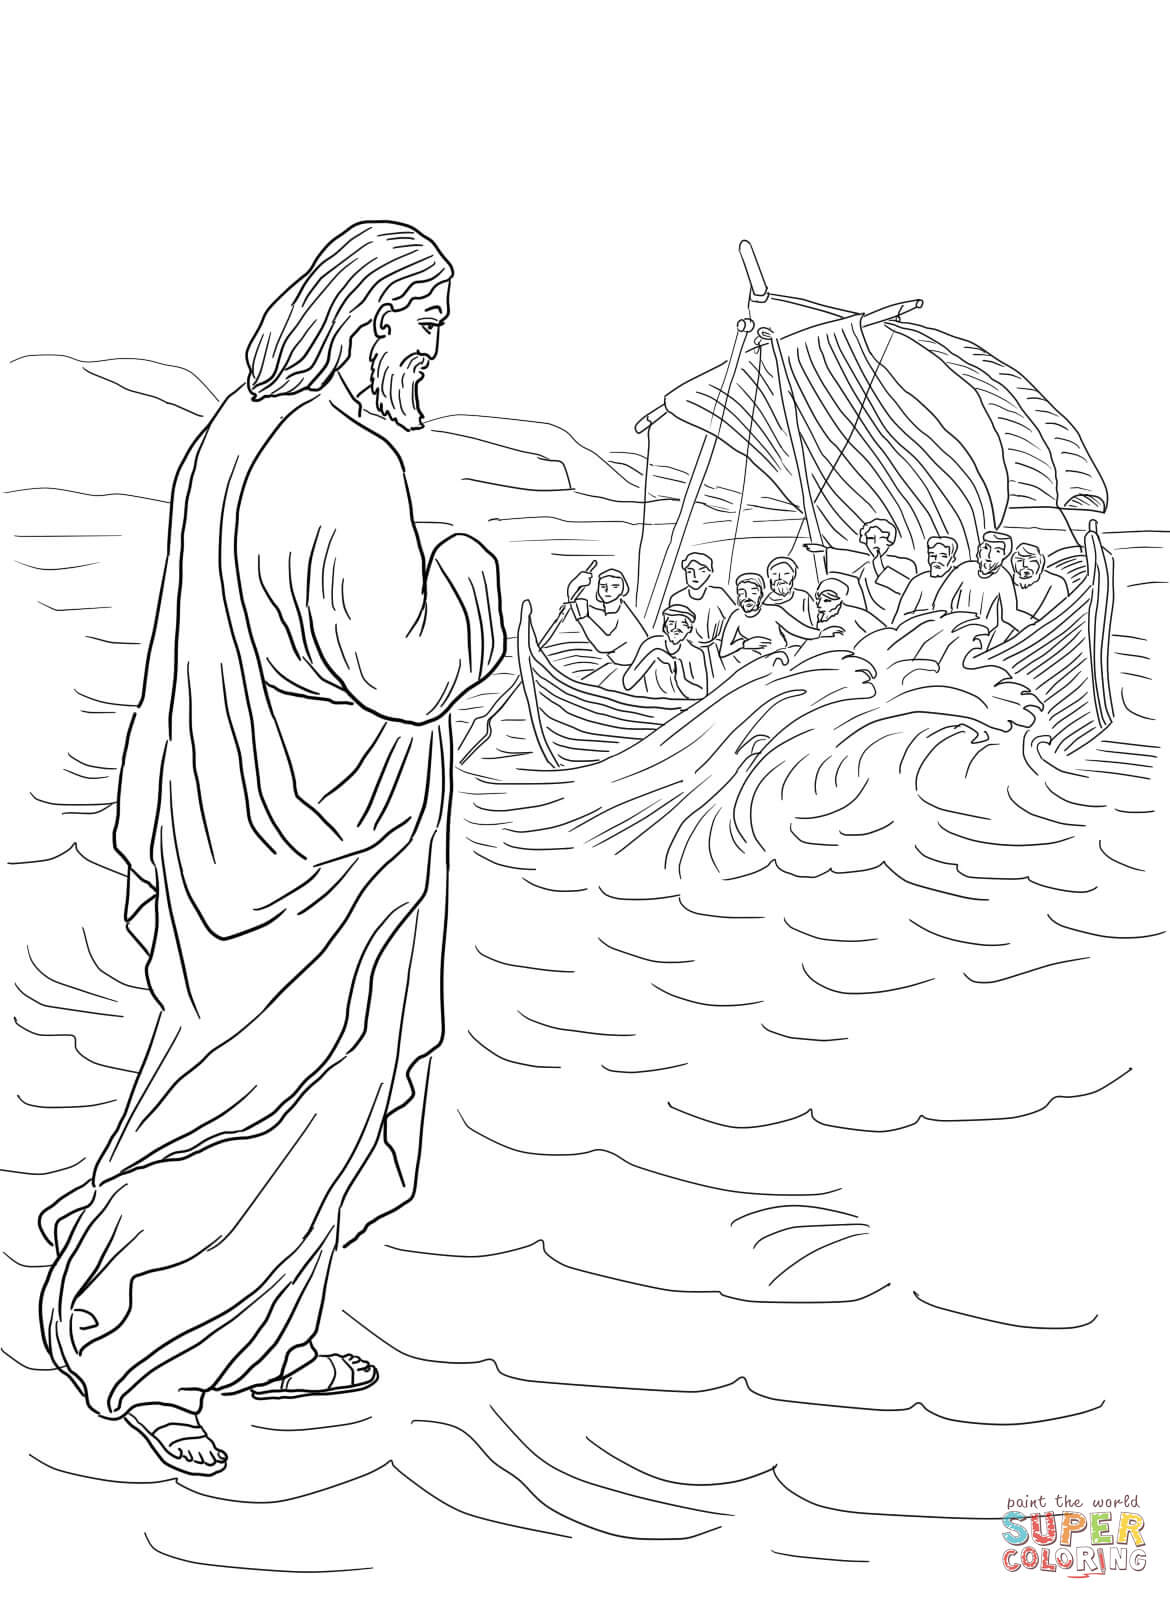 Jesus walking on the water coloring page free printable coloring pages